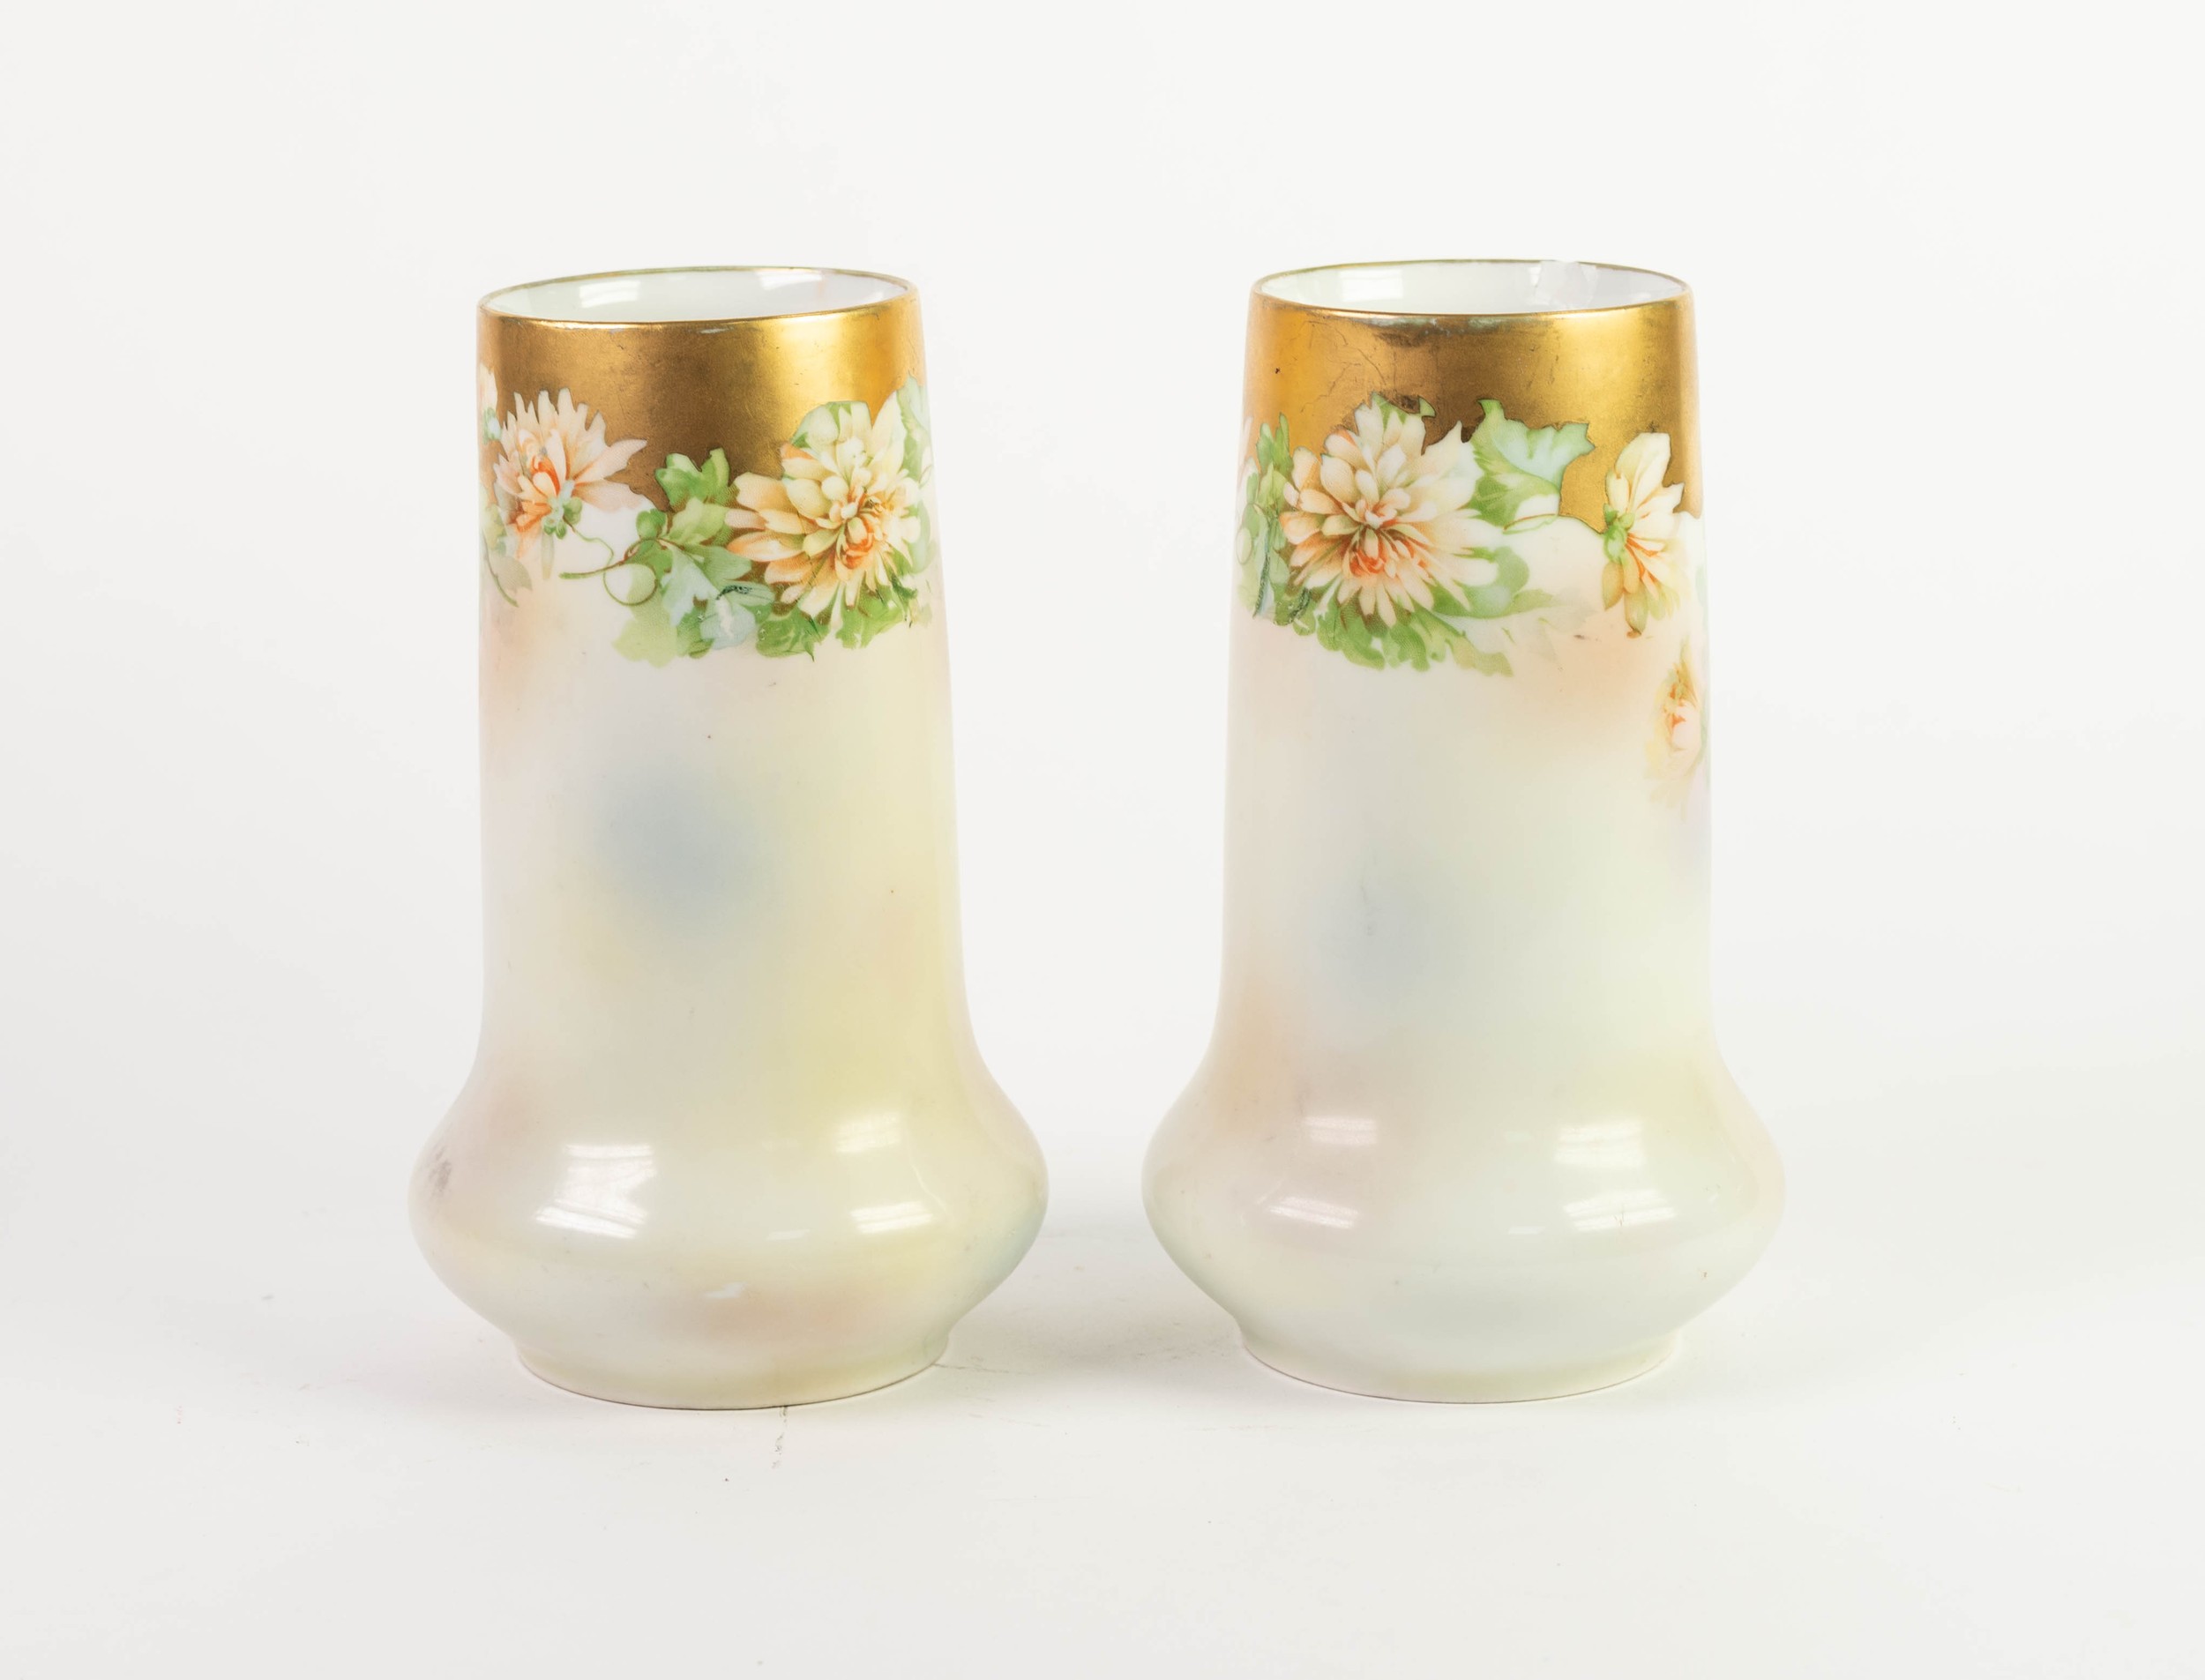 PAIR OF MORITZ ZDEKAUER, STARA ROLE, VIENNA, PORCELAIN VASES, each of slightly tapering, cylindrical - Image 2 of 3